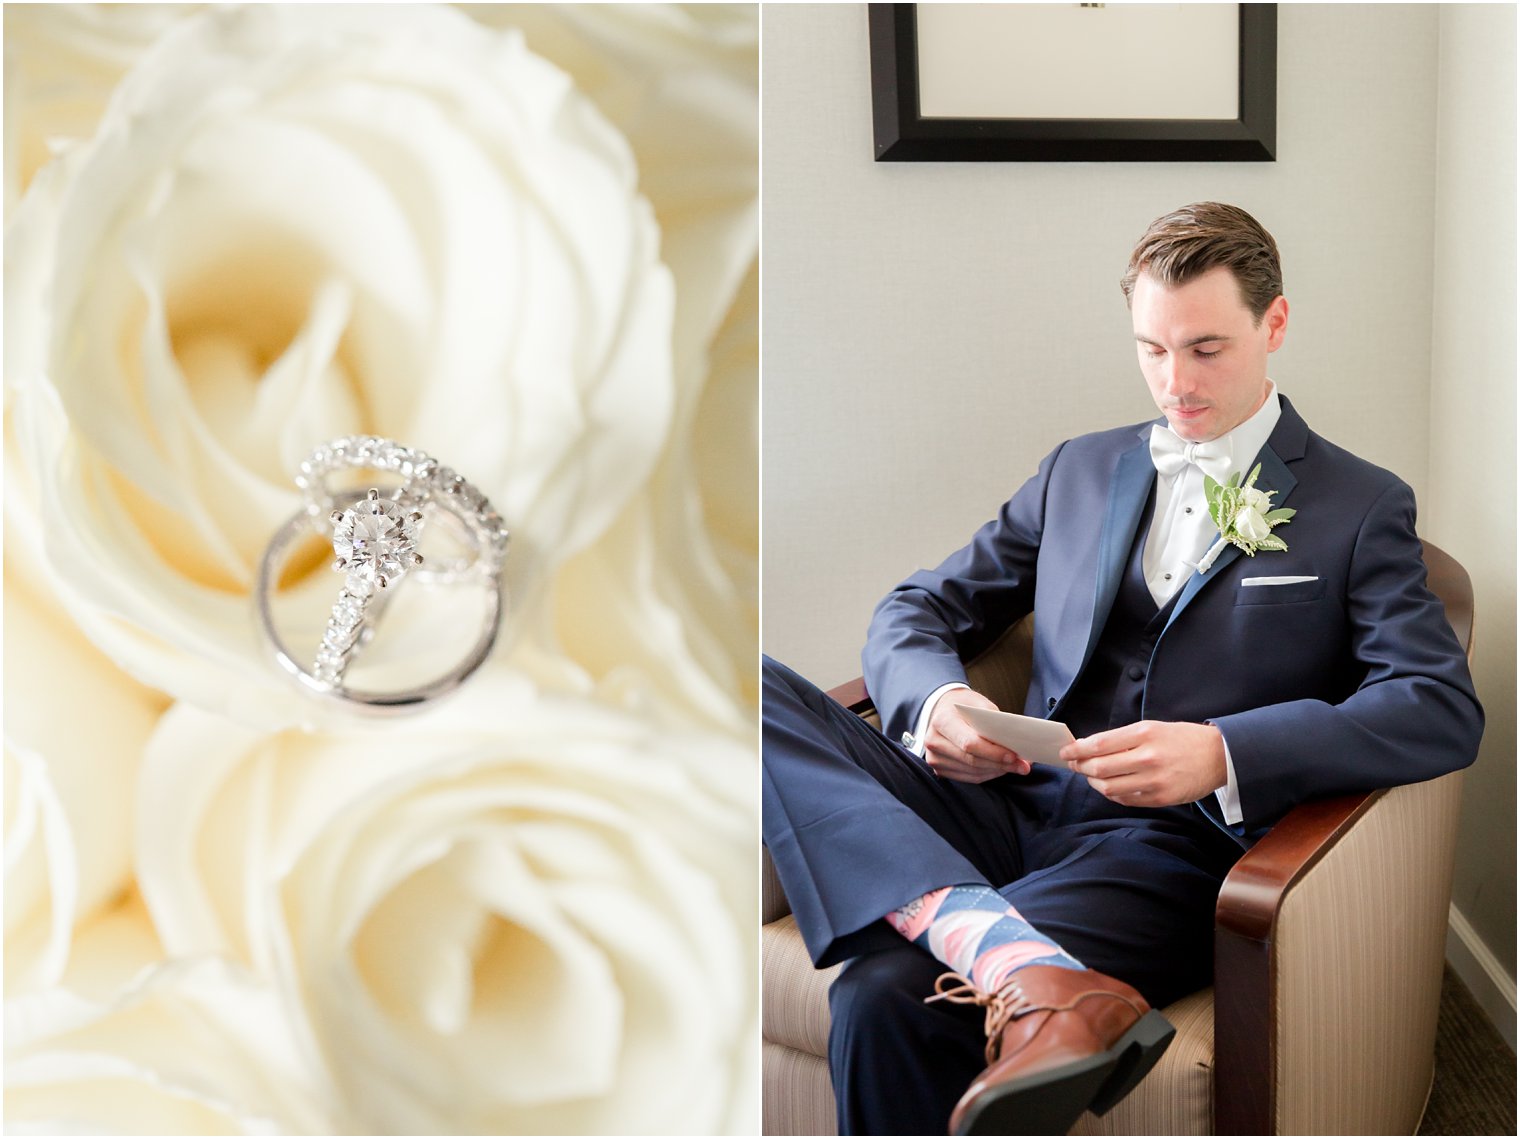 wedding bands on ivory rose while groom reads letter from bride on wedding day photographed by Idalia Photography